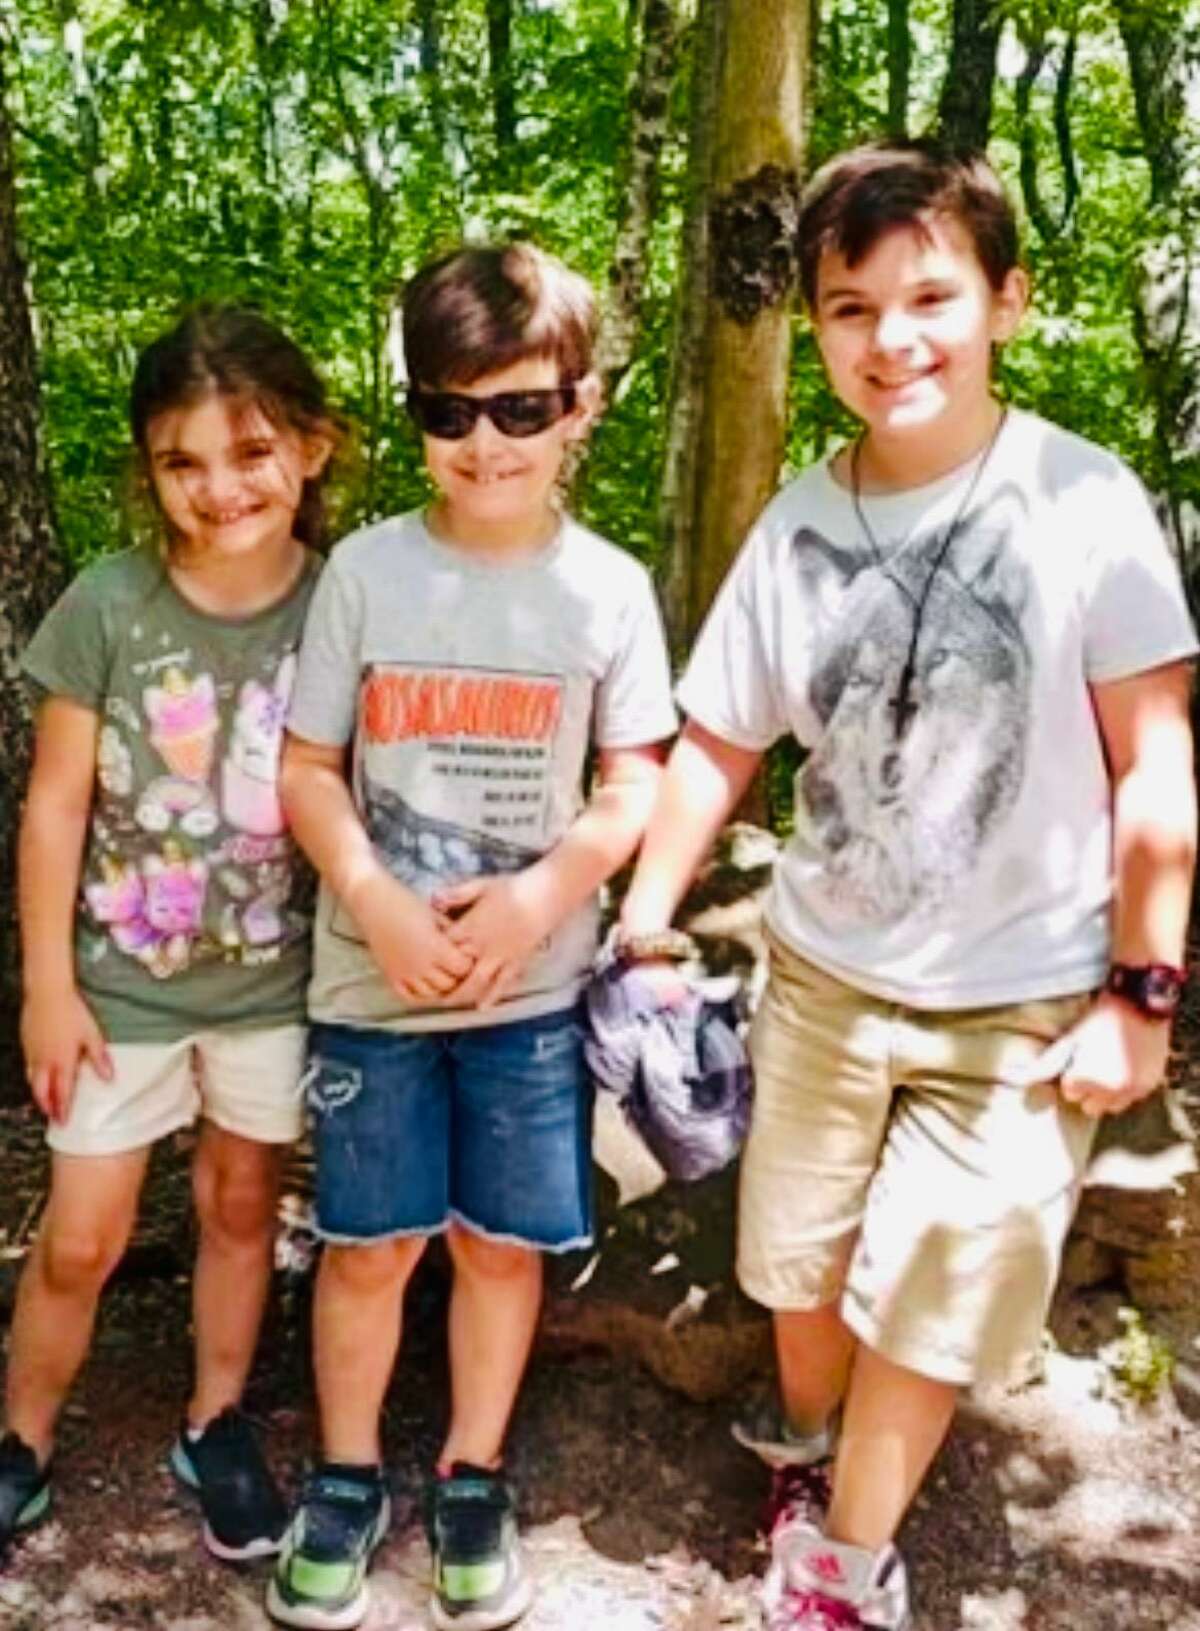 Ariana Wright, 8, Lucas Wright, 9, and Jonathan Wright, 11, were last seen with their father, Jonathan Wright, in Settlers Pass.